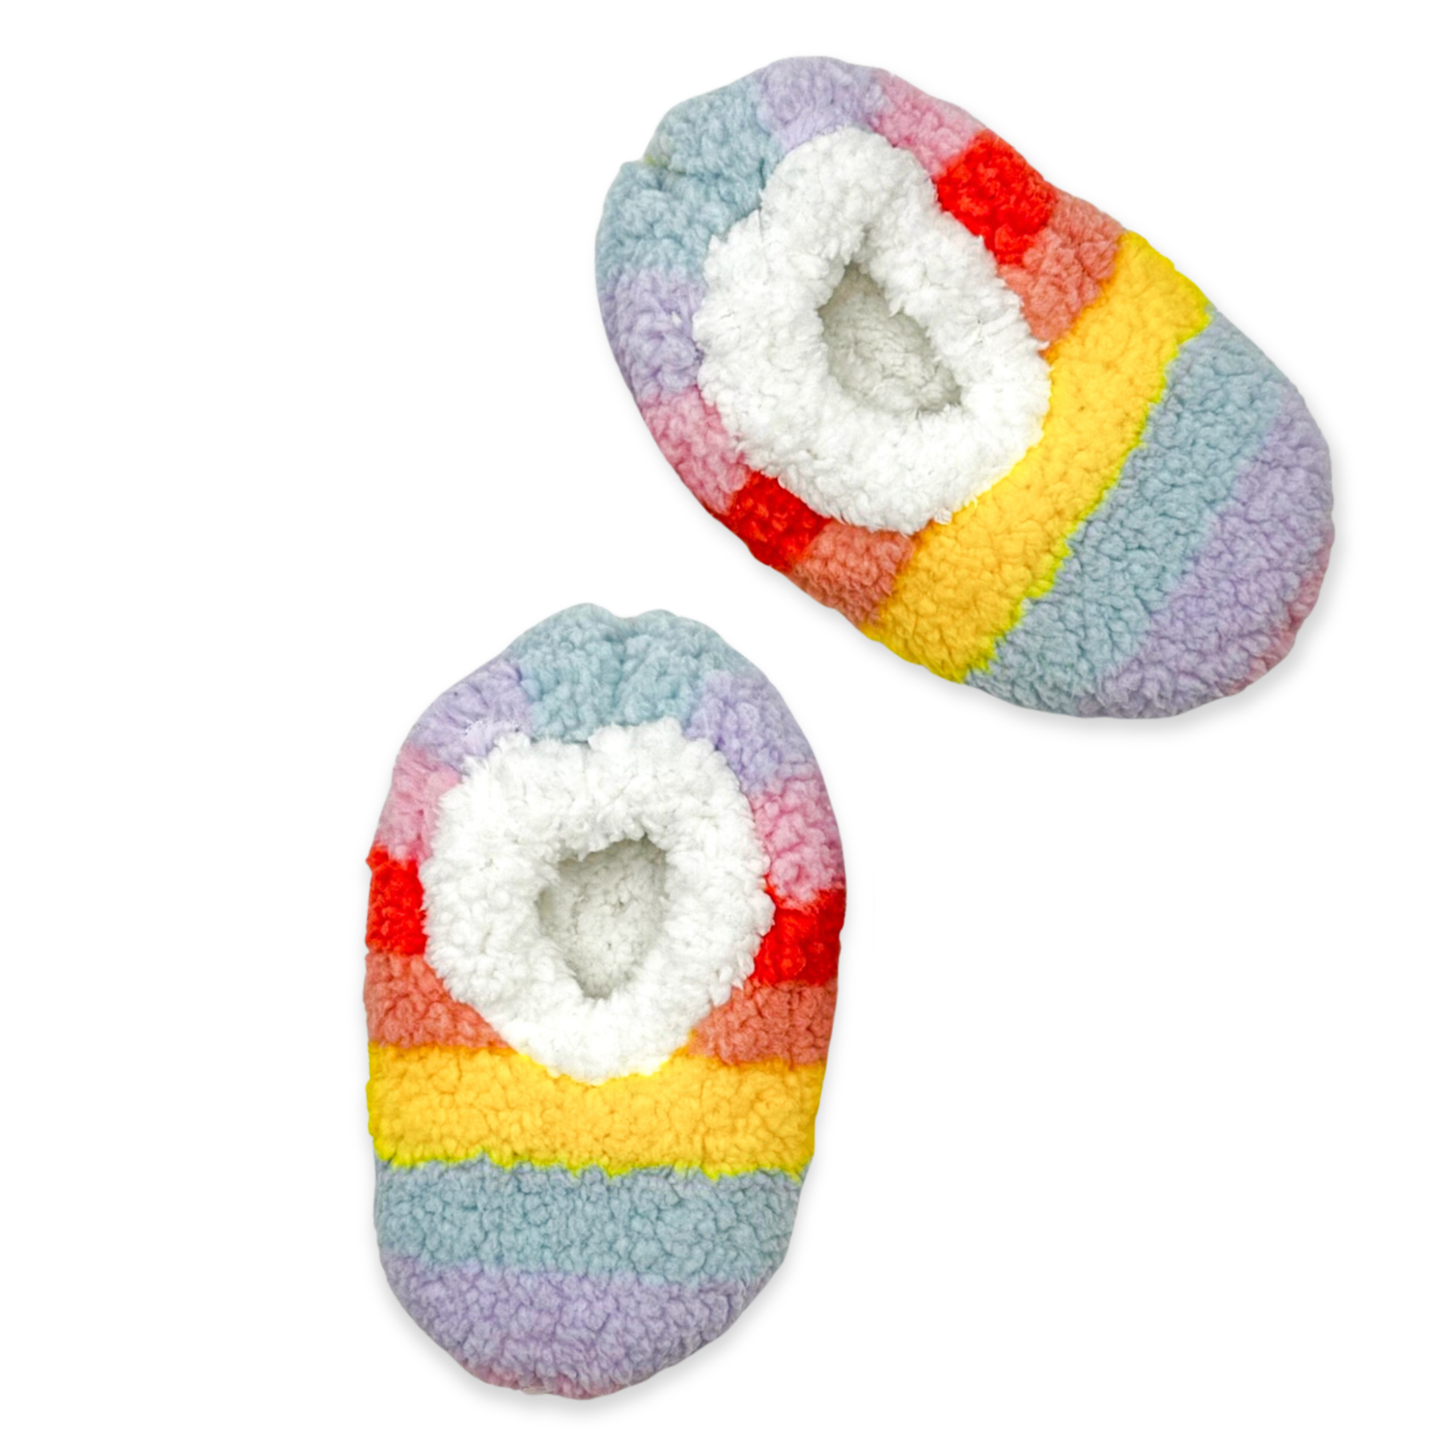 The image depicts a pair of rainbow striped slippers. The slippers are made of a soft, fuzzy material and have a closed toe design. They are perfect for keeping your feet warm and cozy on cold days.